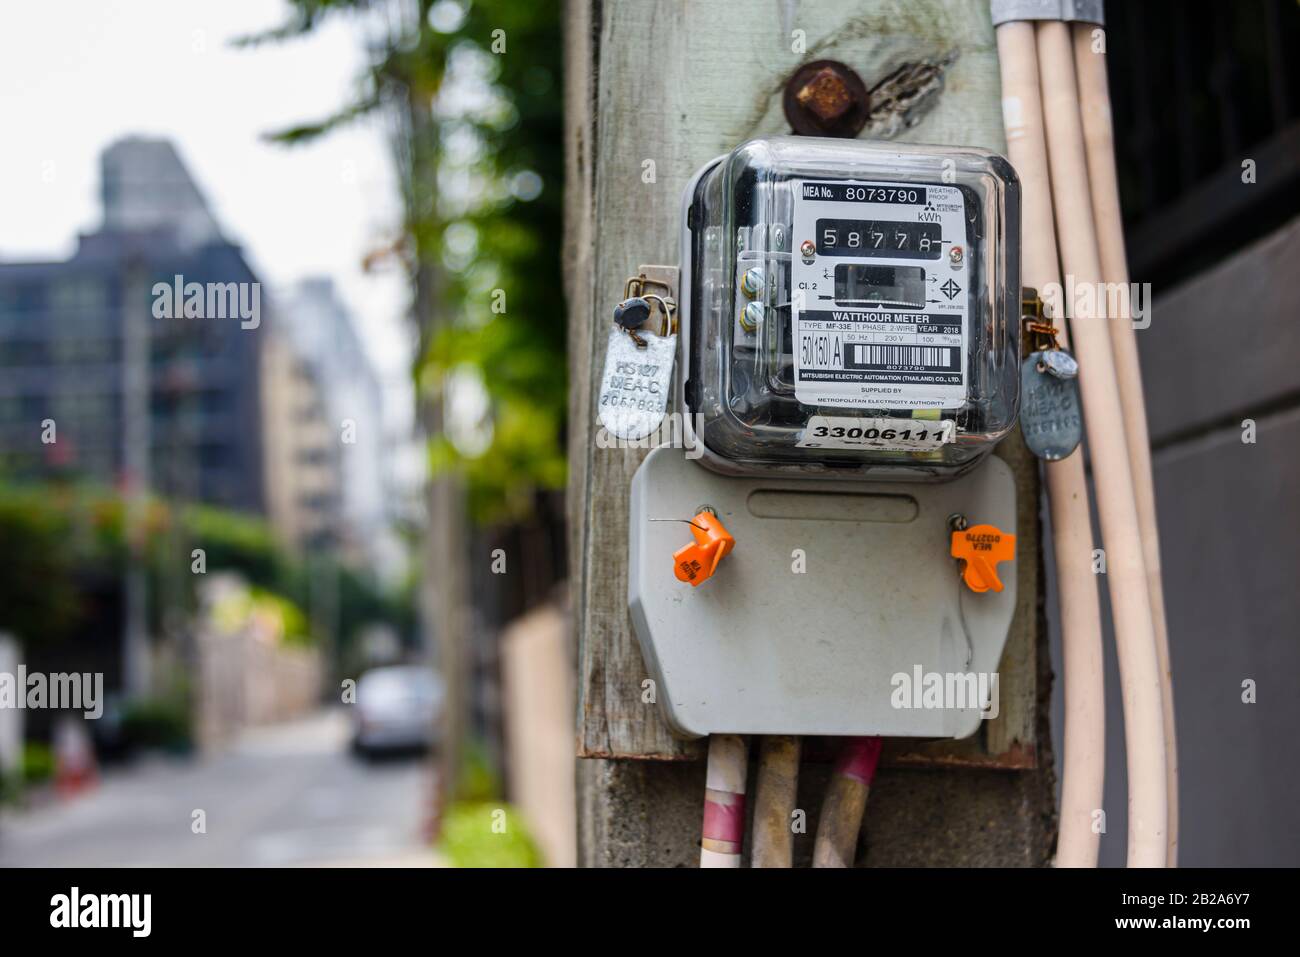 Electricity meter on an electricity pole in Thailand Stock Photo